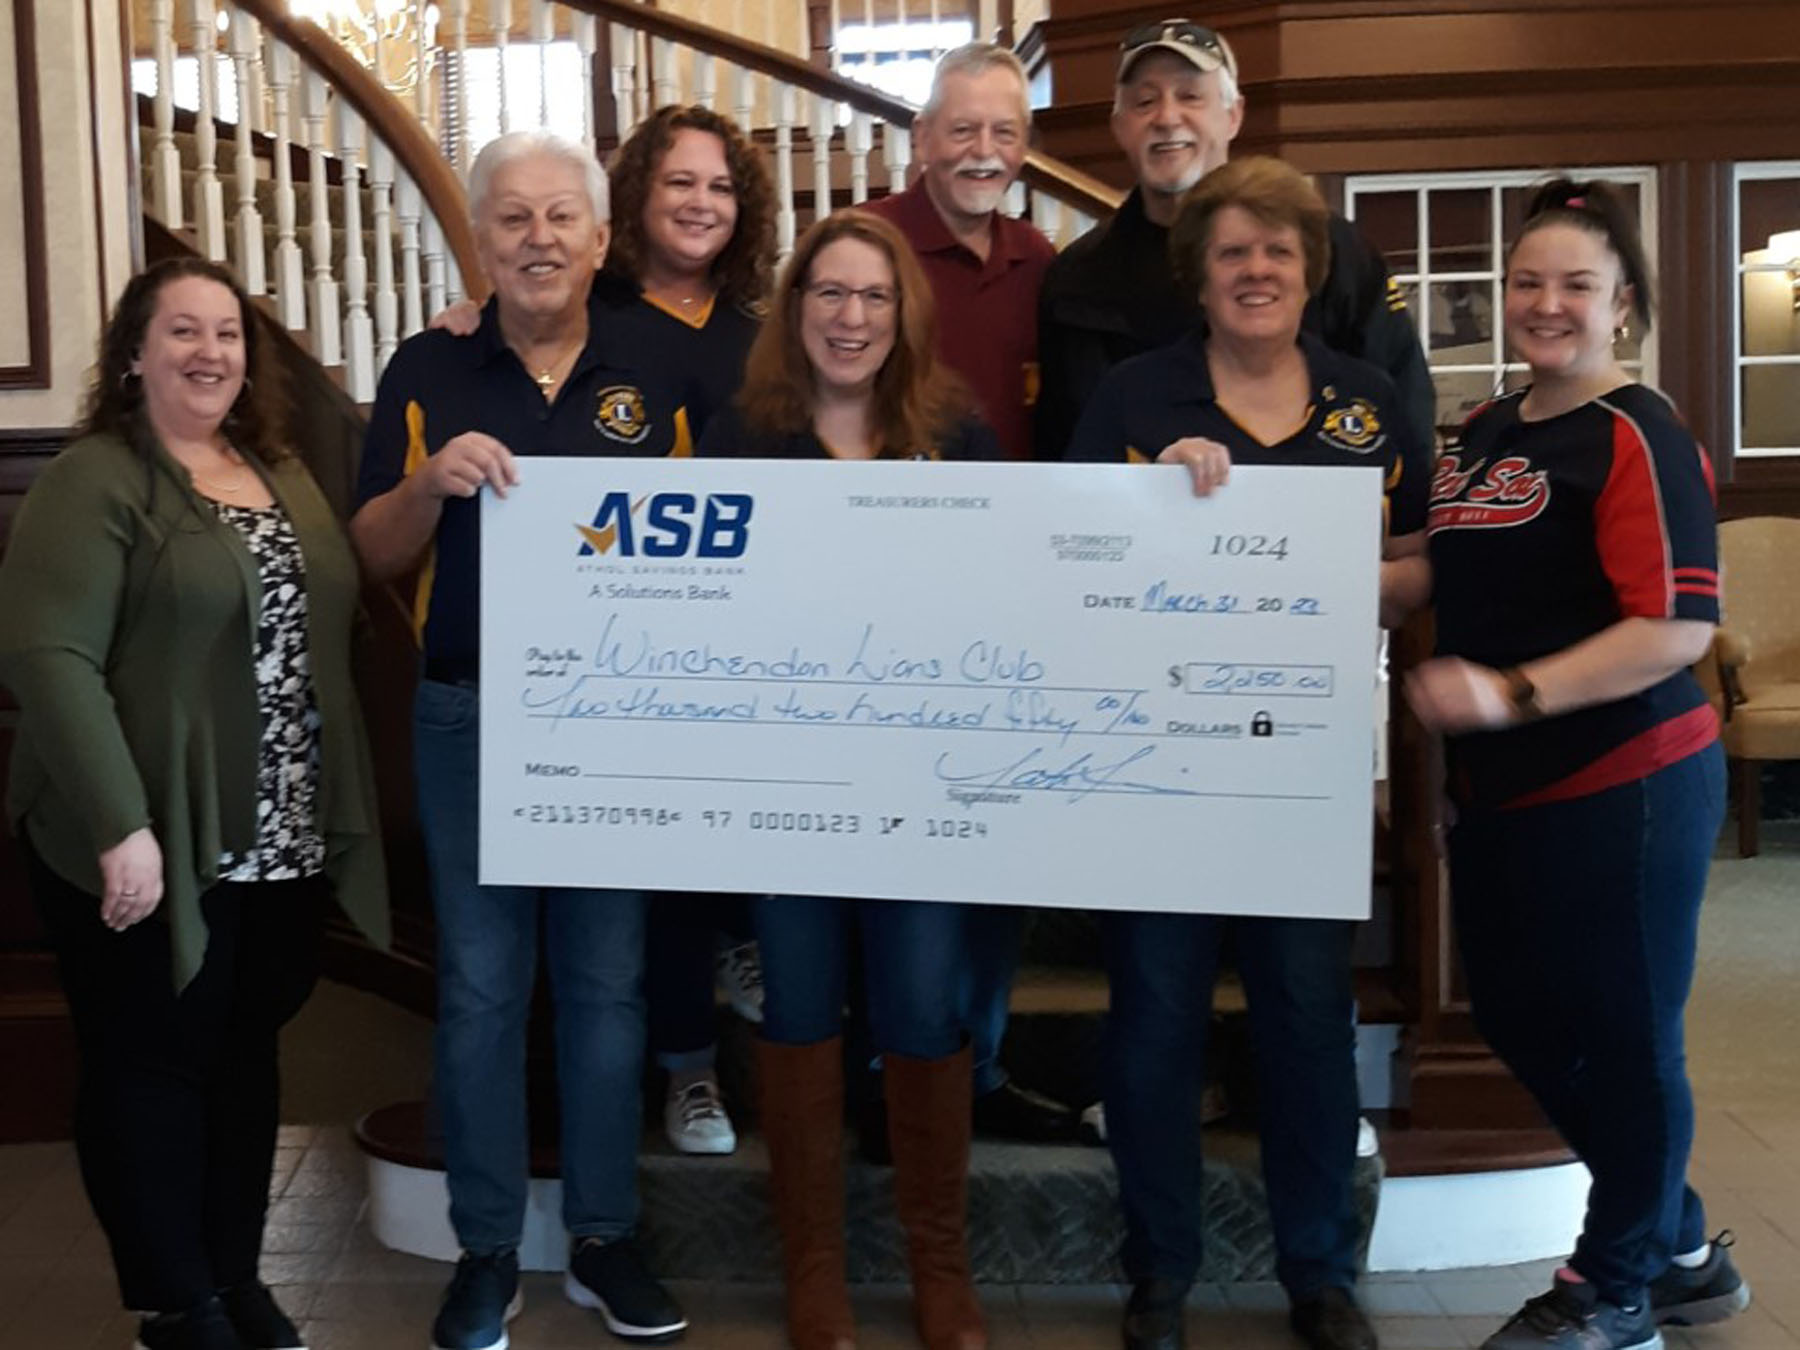 ASB presents check to Winchendon Lions